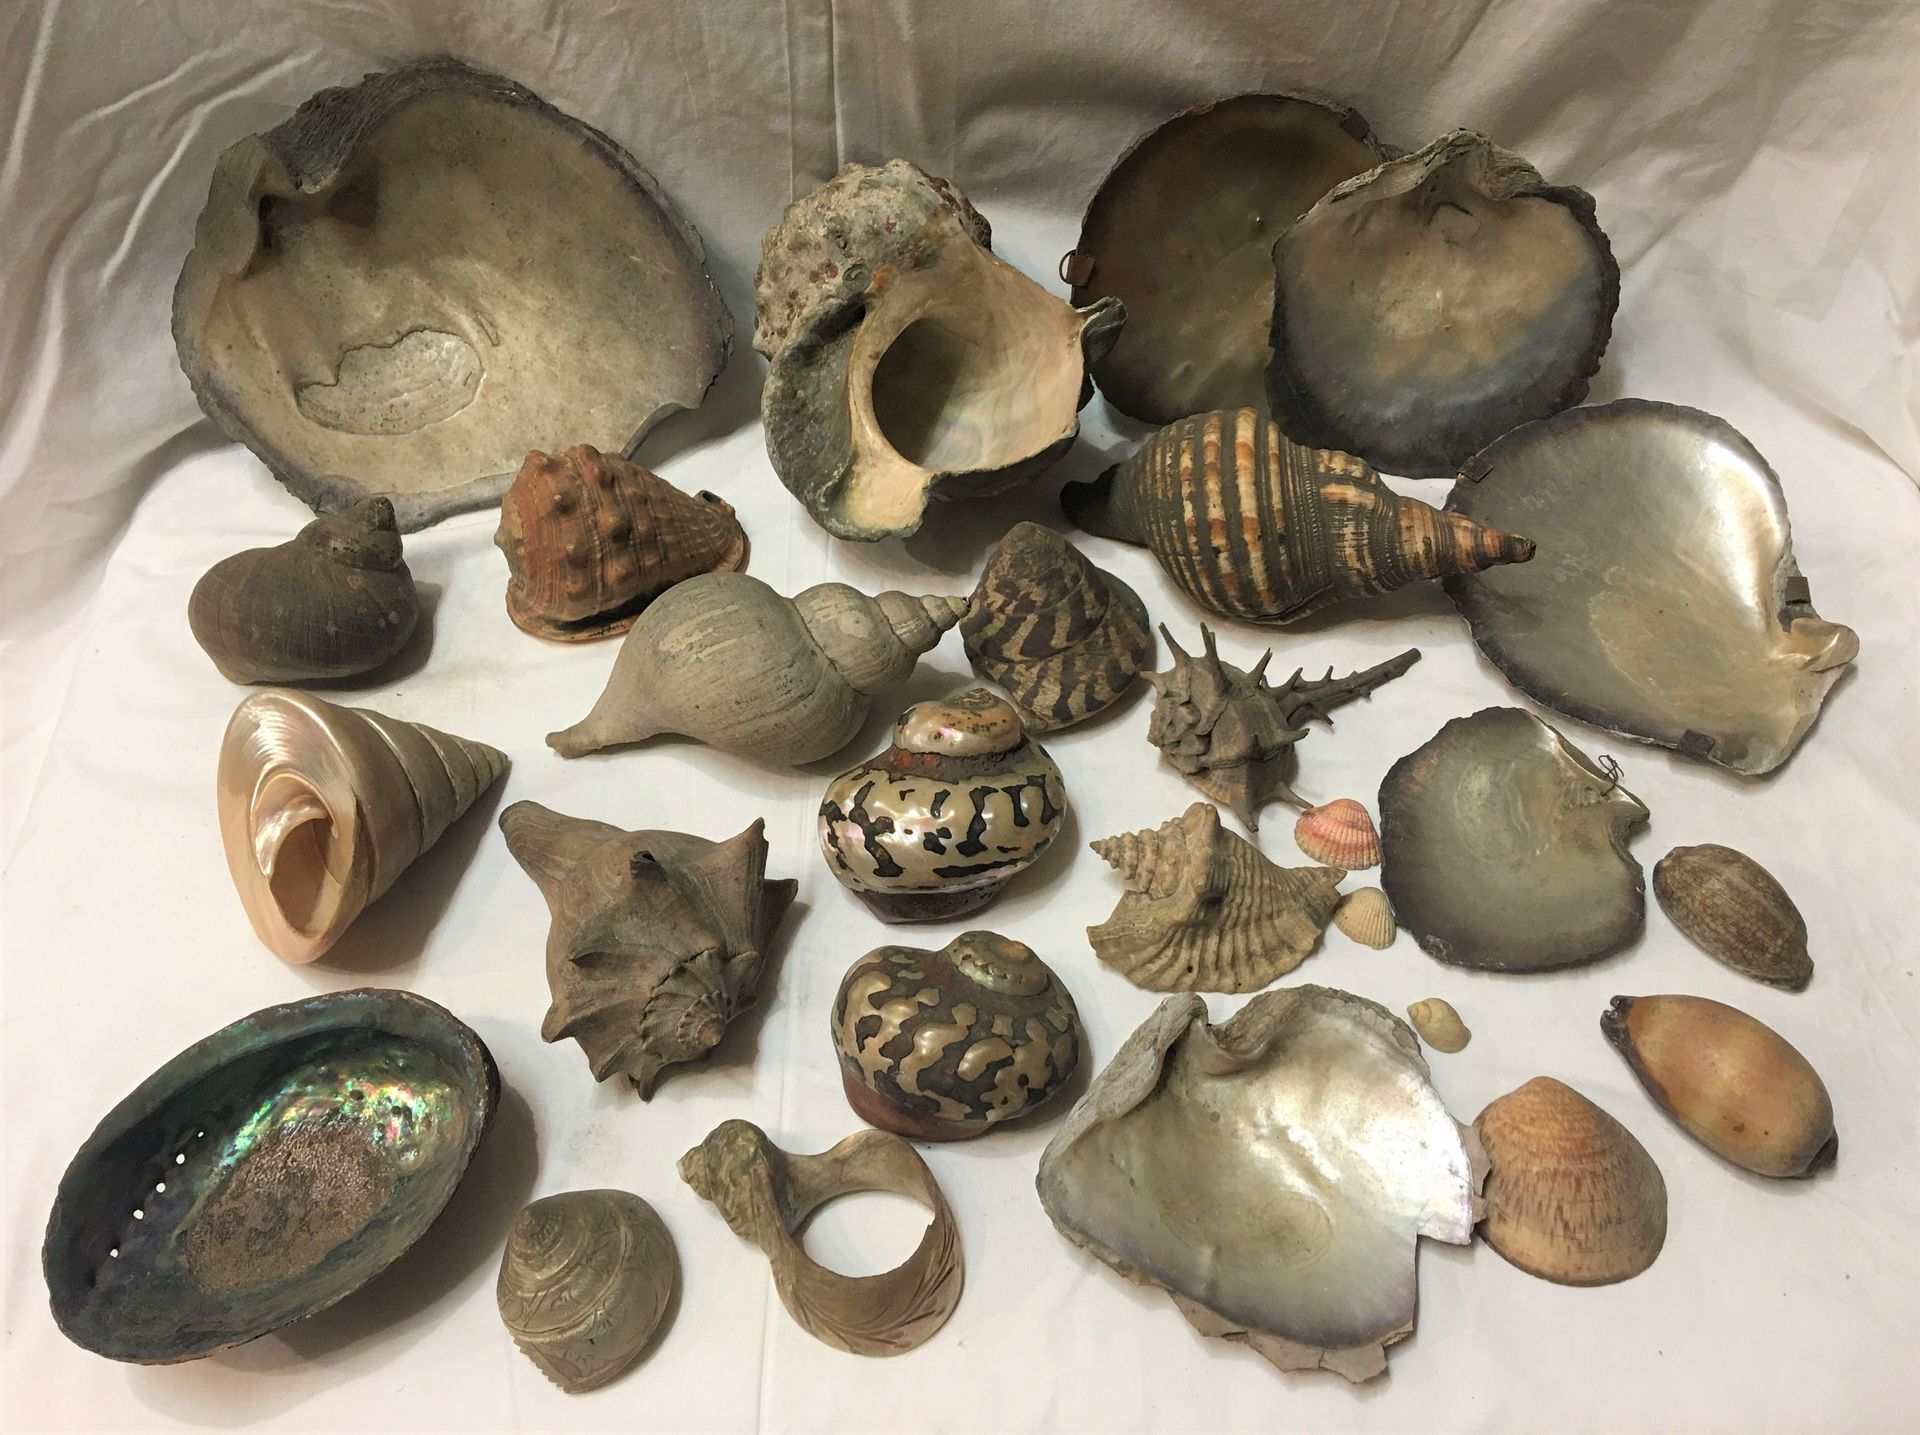 Null A lot including 20 specimens of exotic marine shells including:

Turbo spp,&hellip;